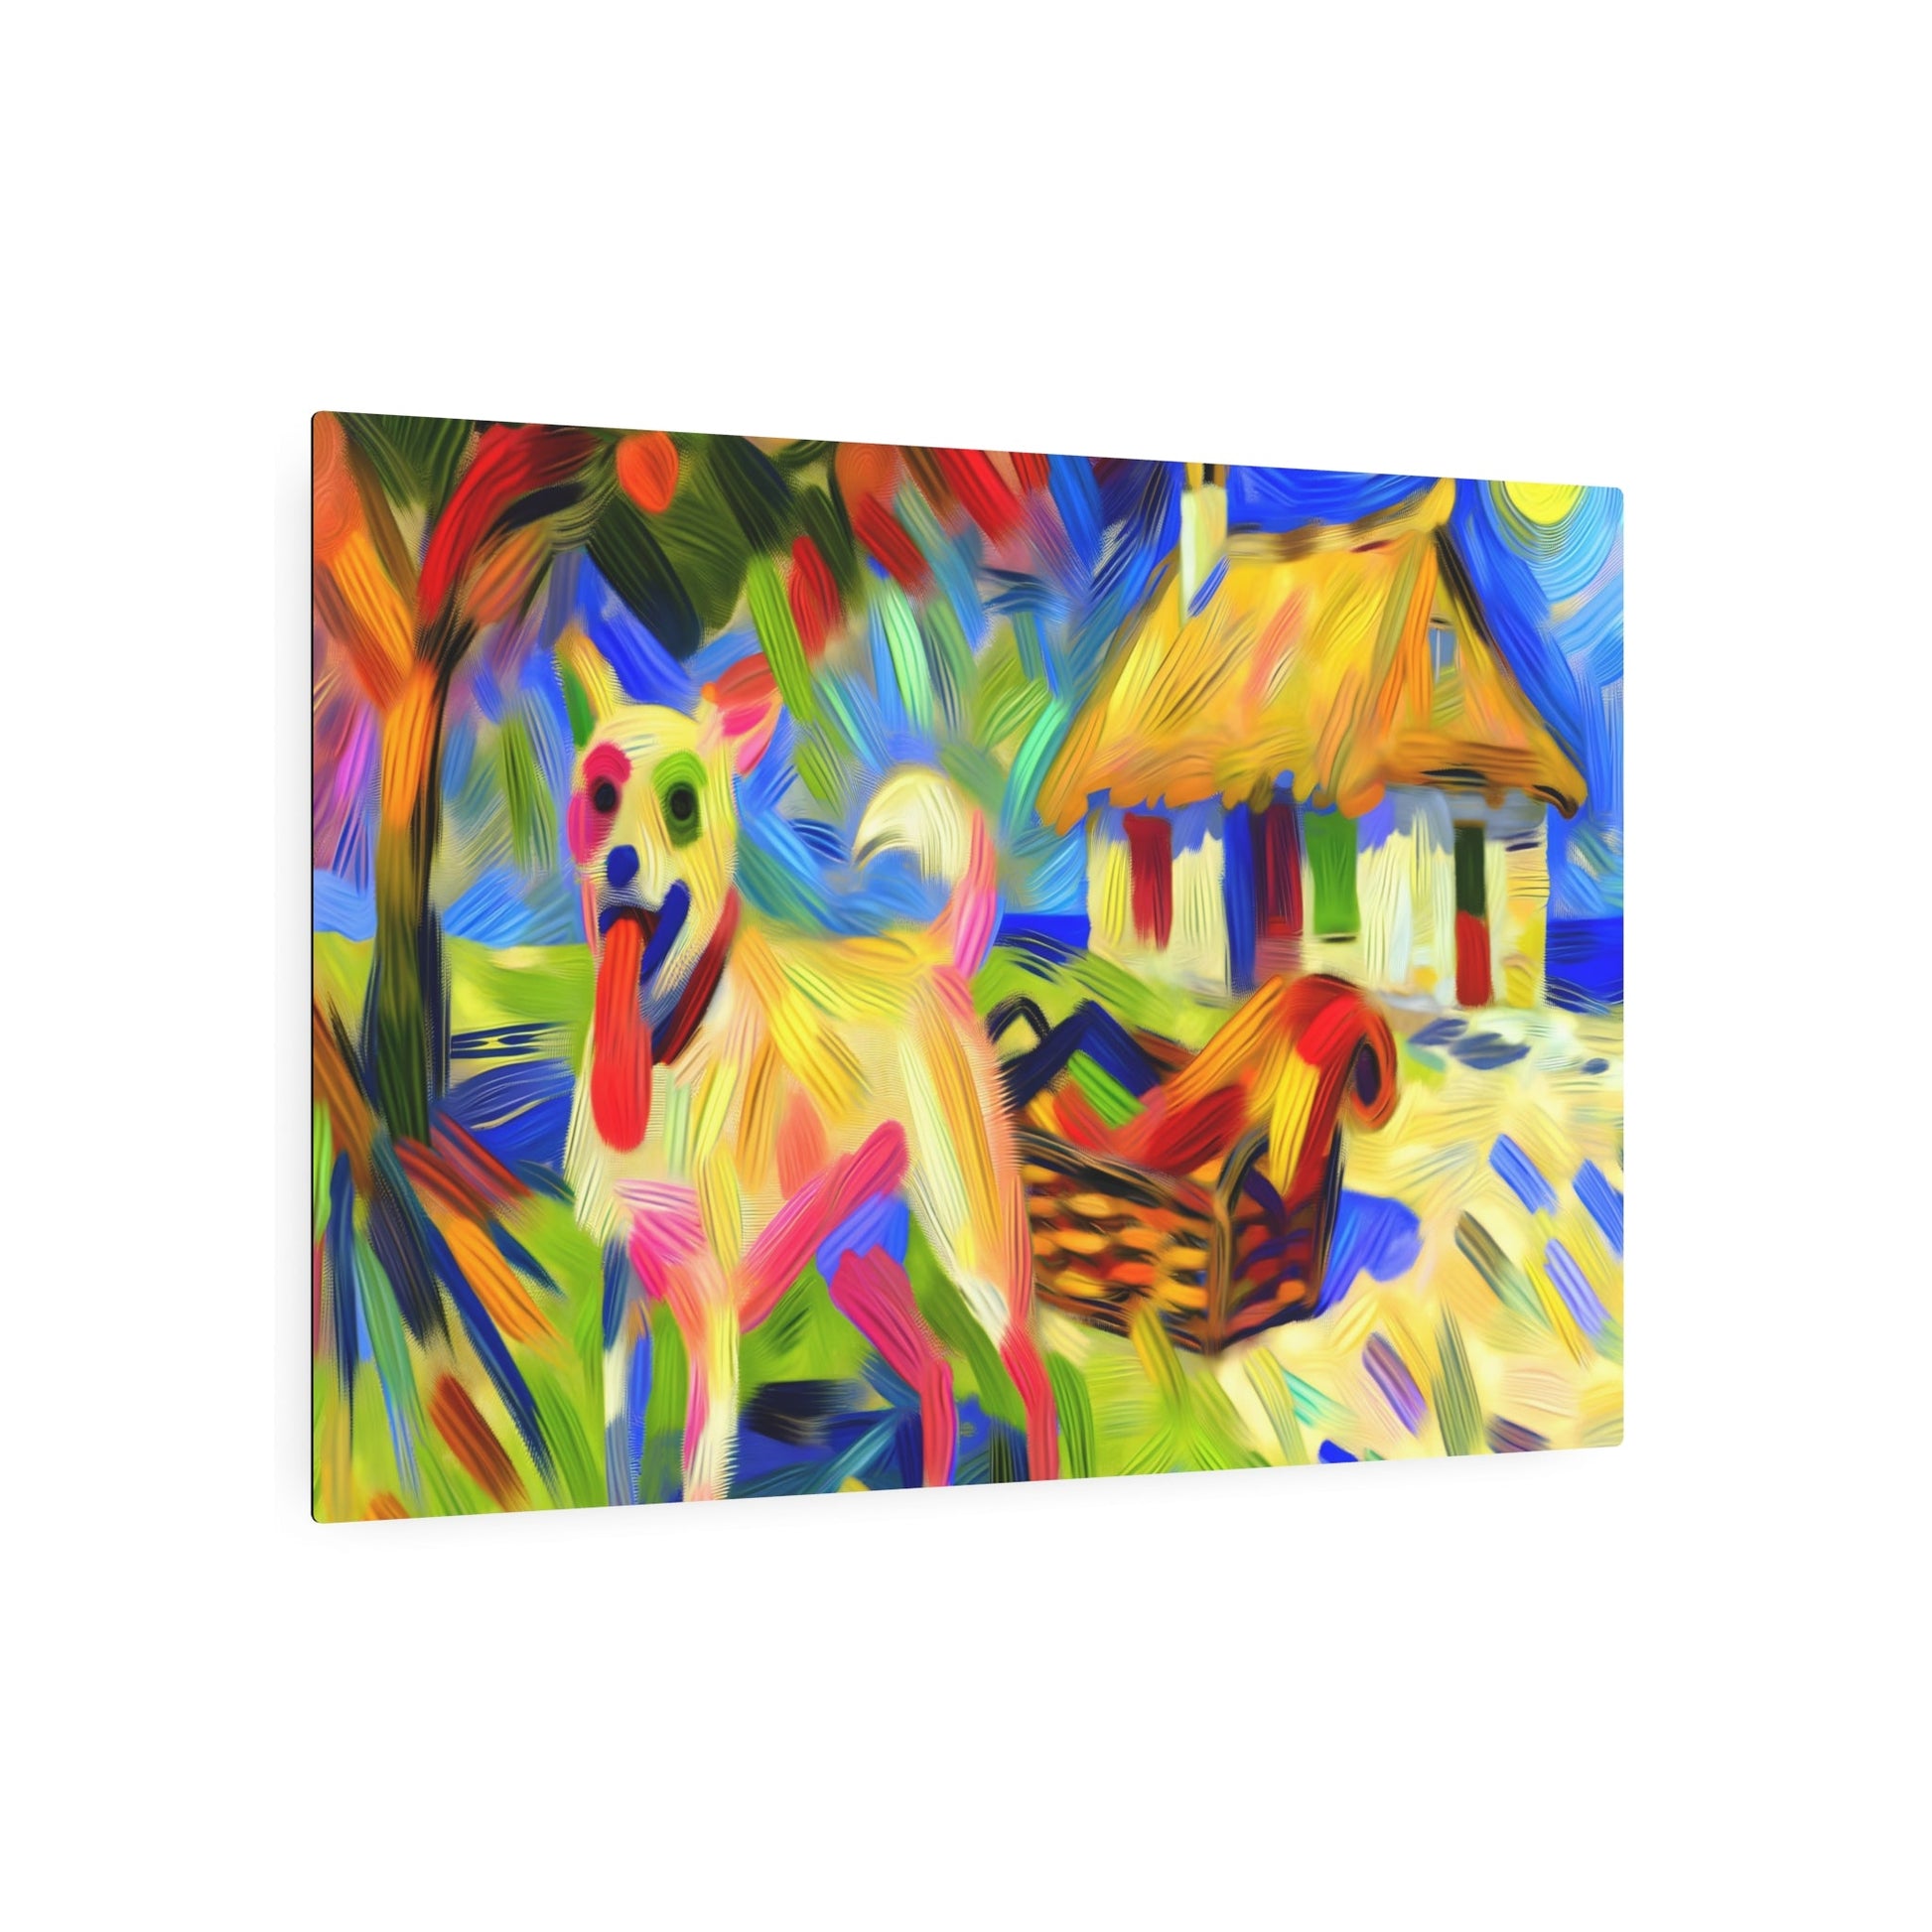 Metal Poster Art | "Post-Impressionist Western Art Style - Lively and Colorful Dog Scene Painting" - Metal Poster Art 36″ x 24″ (Horizontal) 0.12''